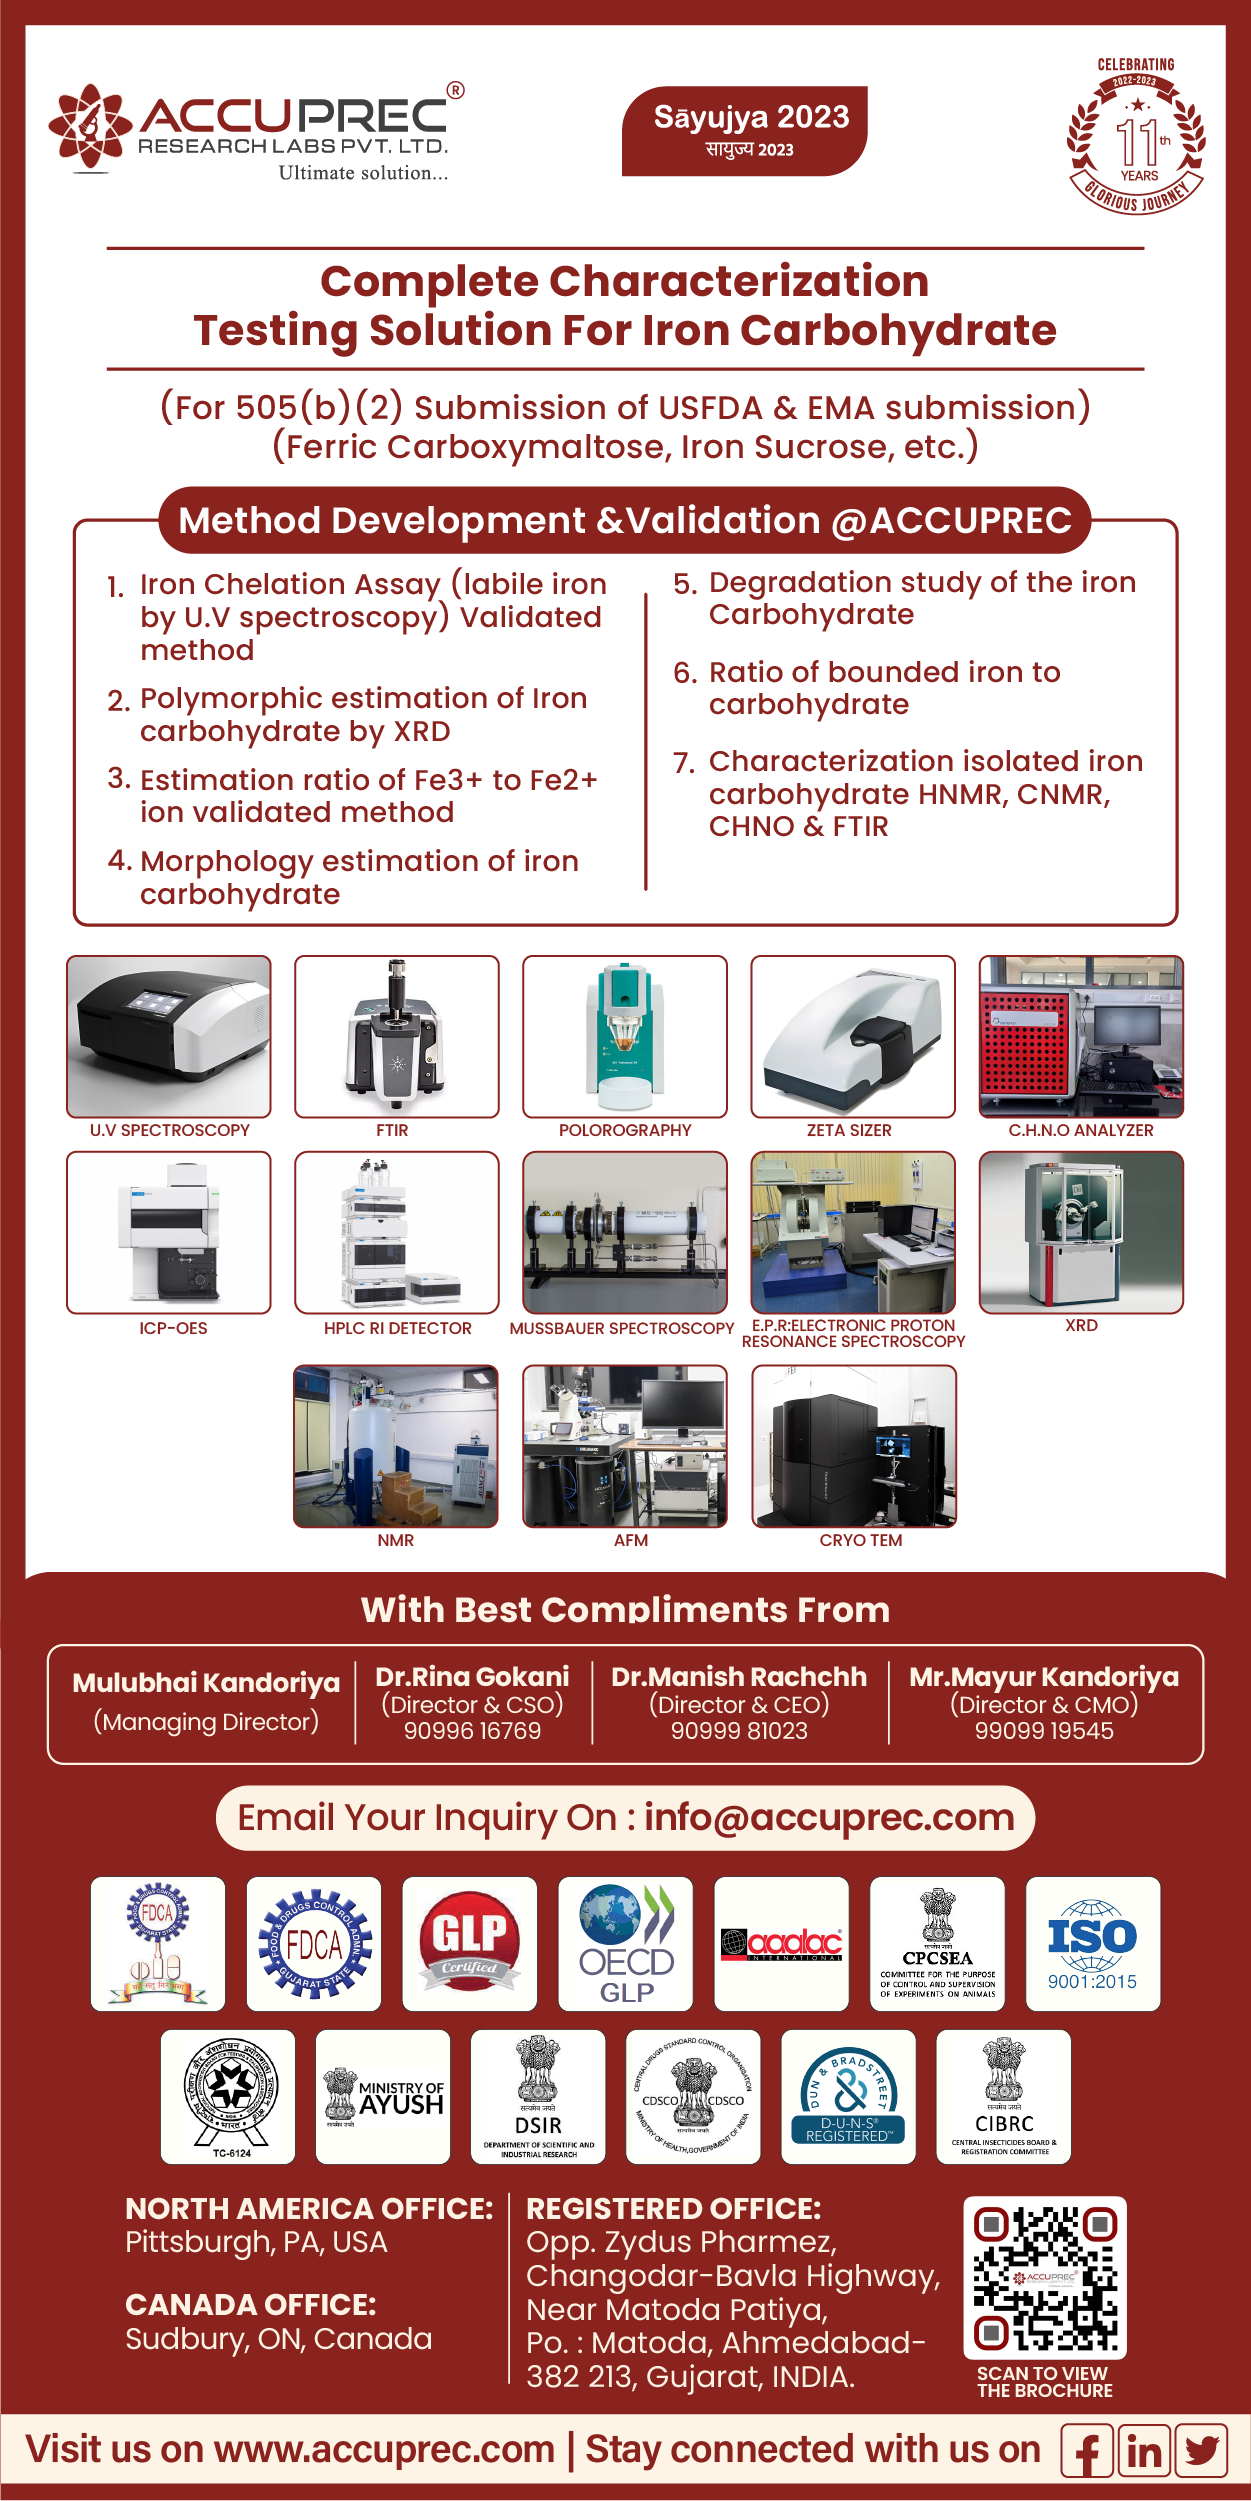 Complete Characterization Testing Solution For Iron Carbohydrate